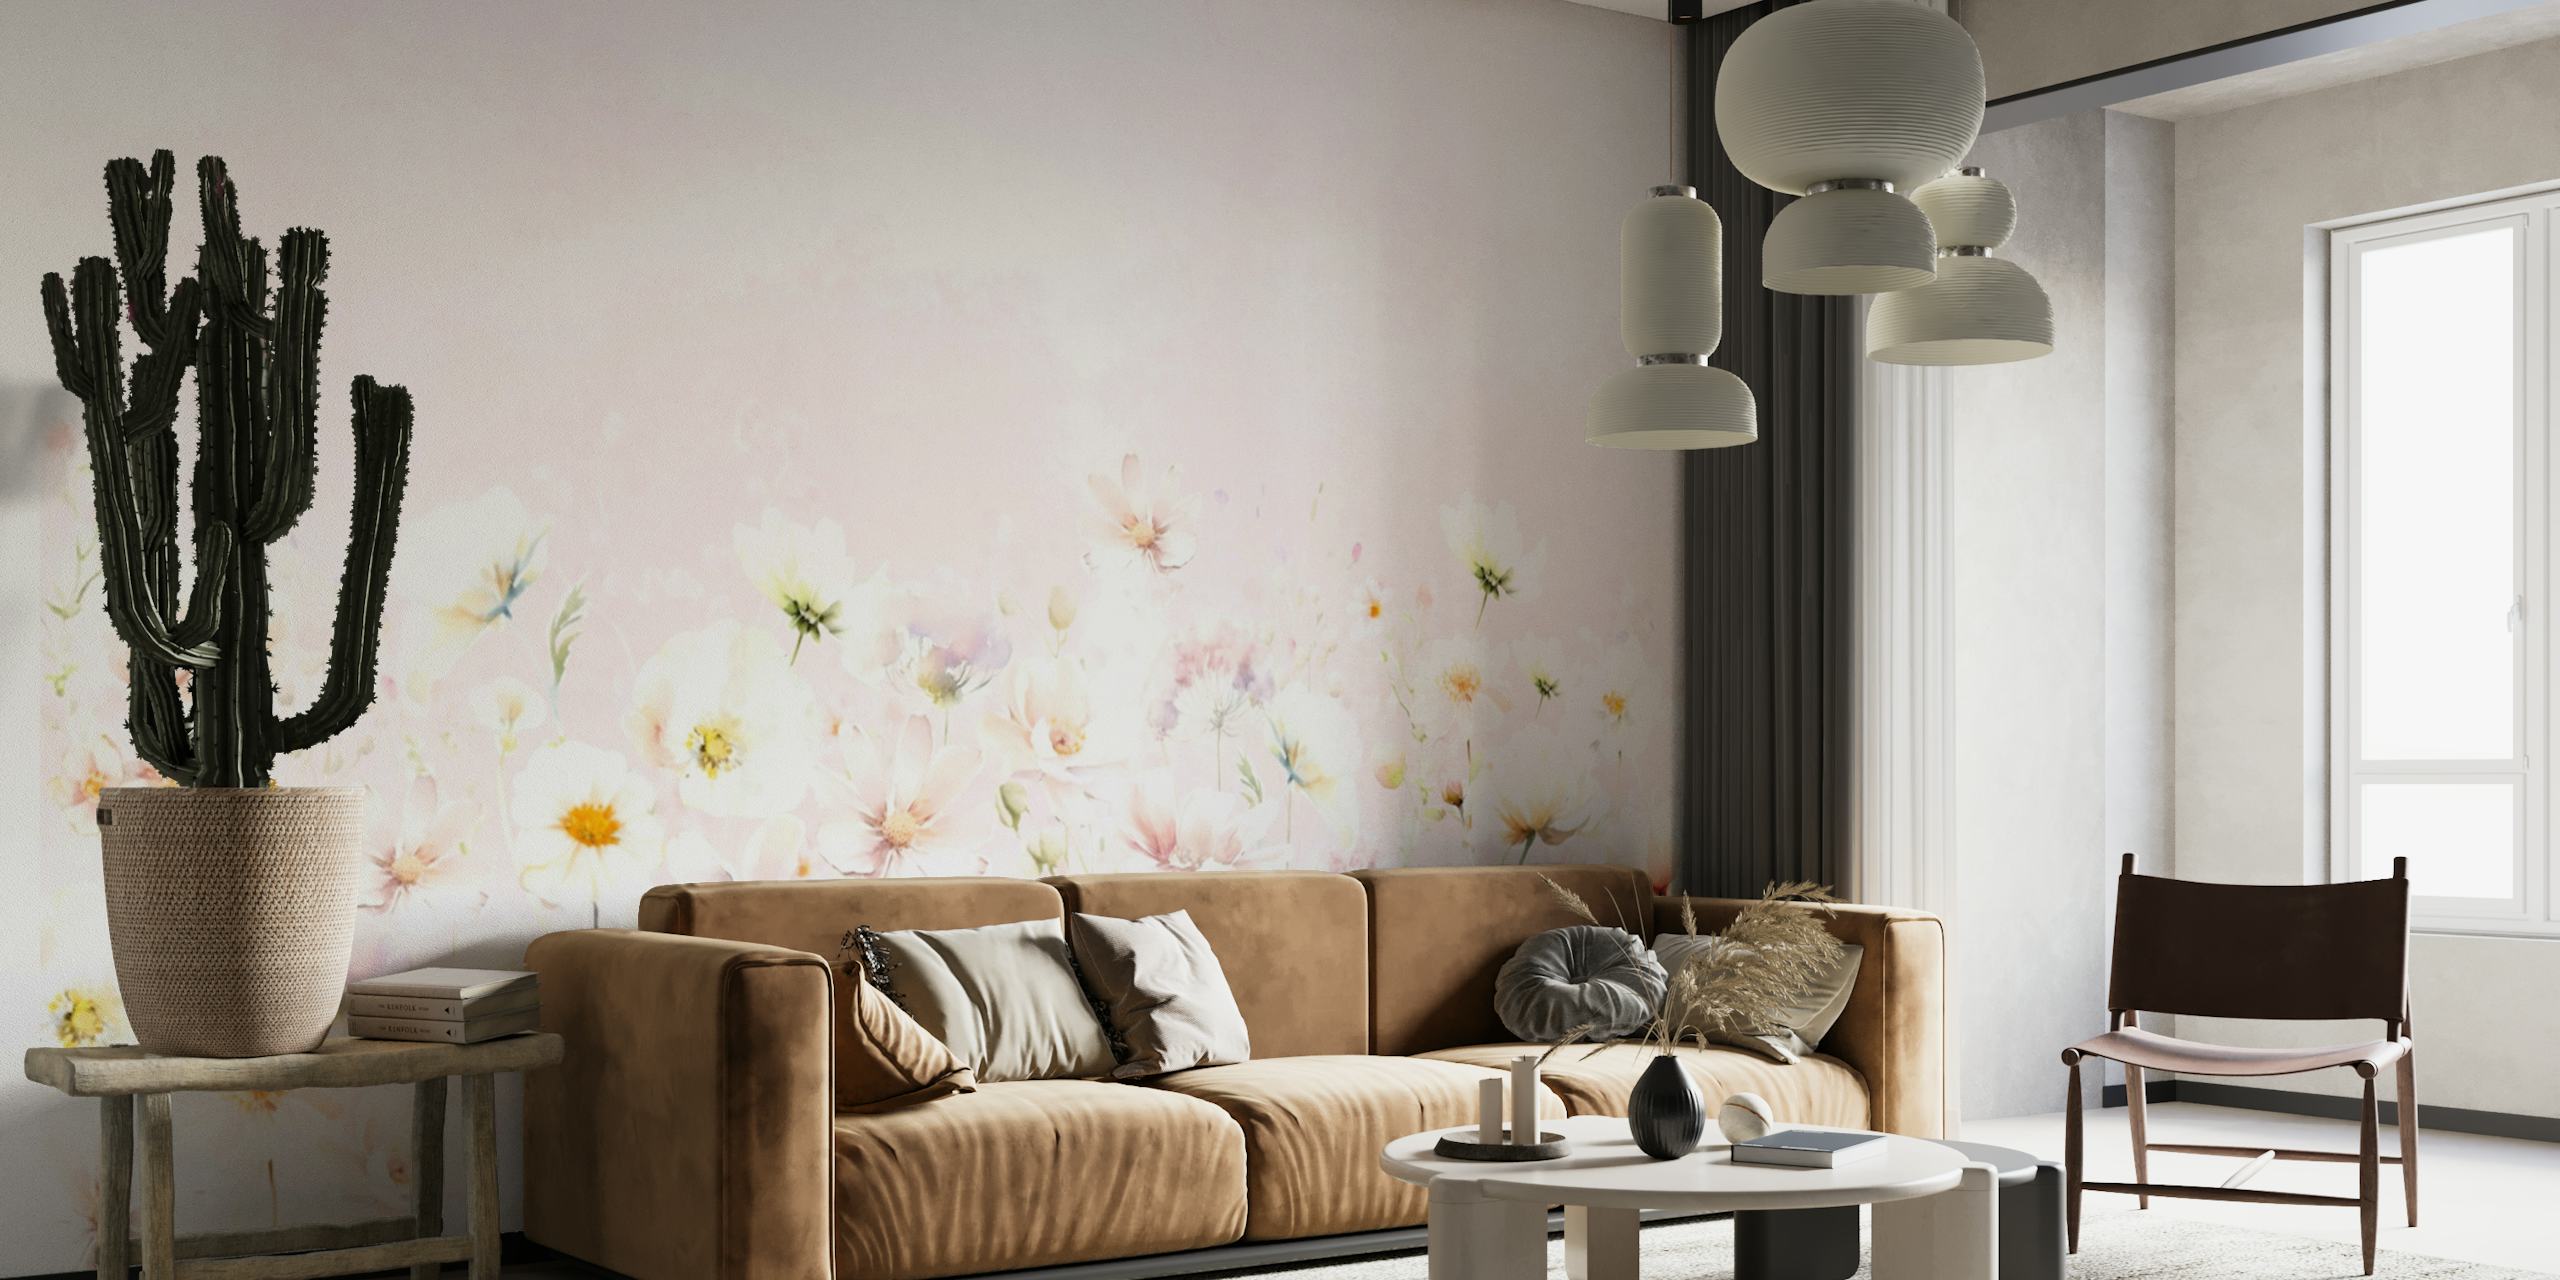 Blush Wildflower Meadow wall mural with pastel pink hues and soft floral patterns